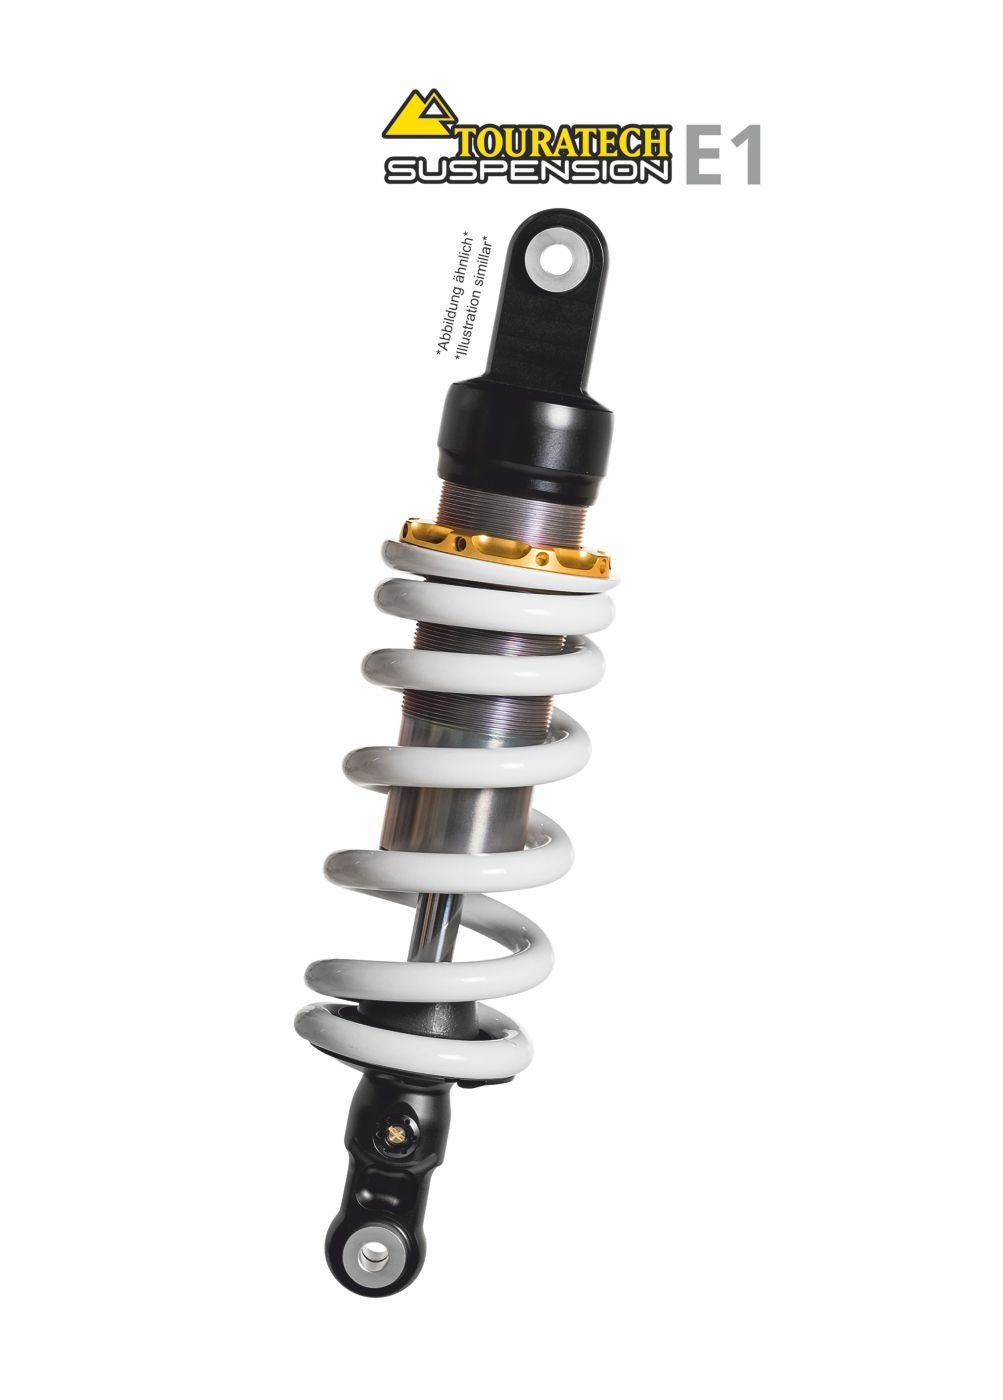 Touratech Suspension E1 shock absorber for BMW R 1200 RT No ESA Front 2004 - 2013